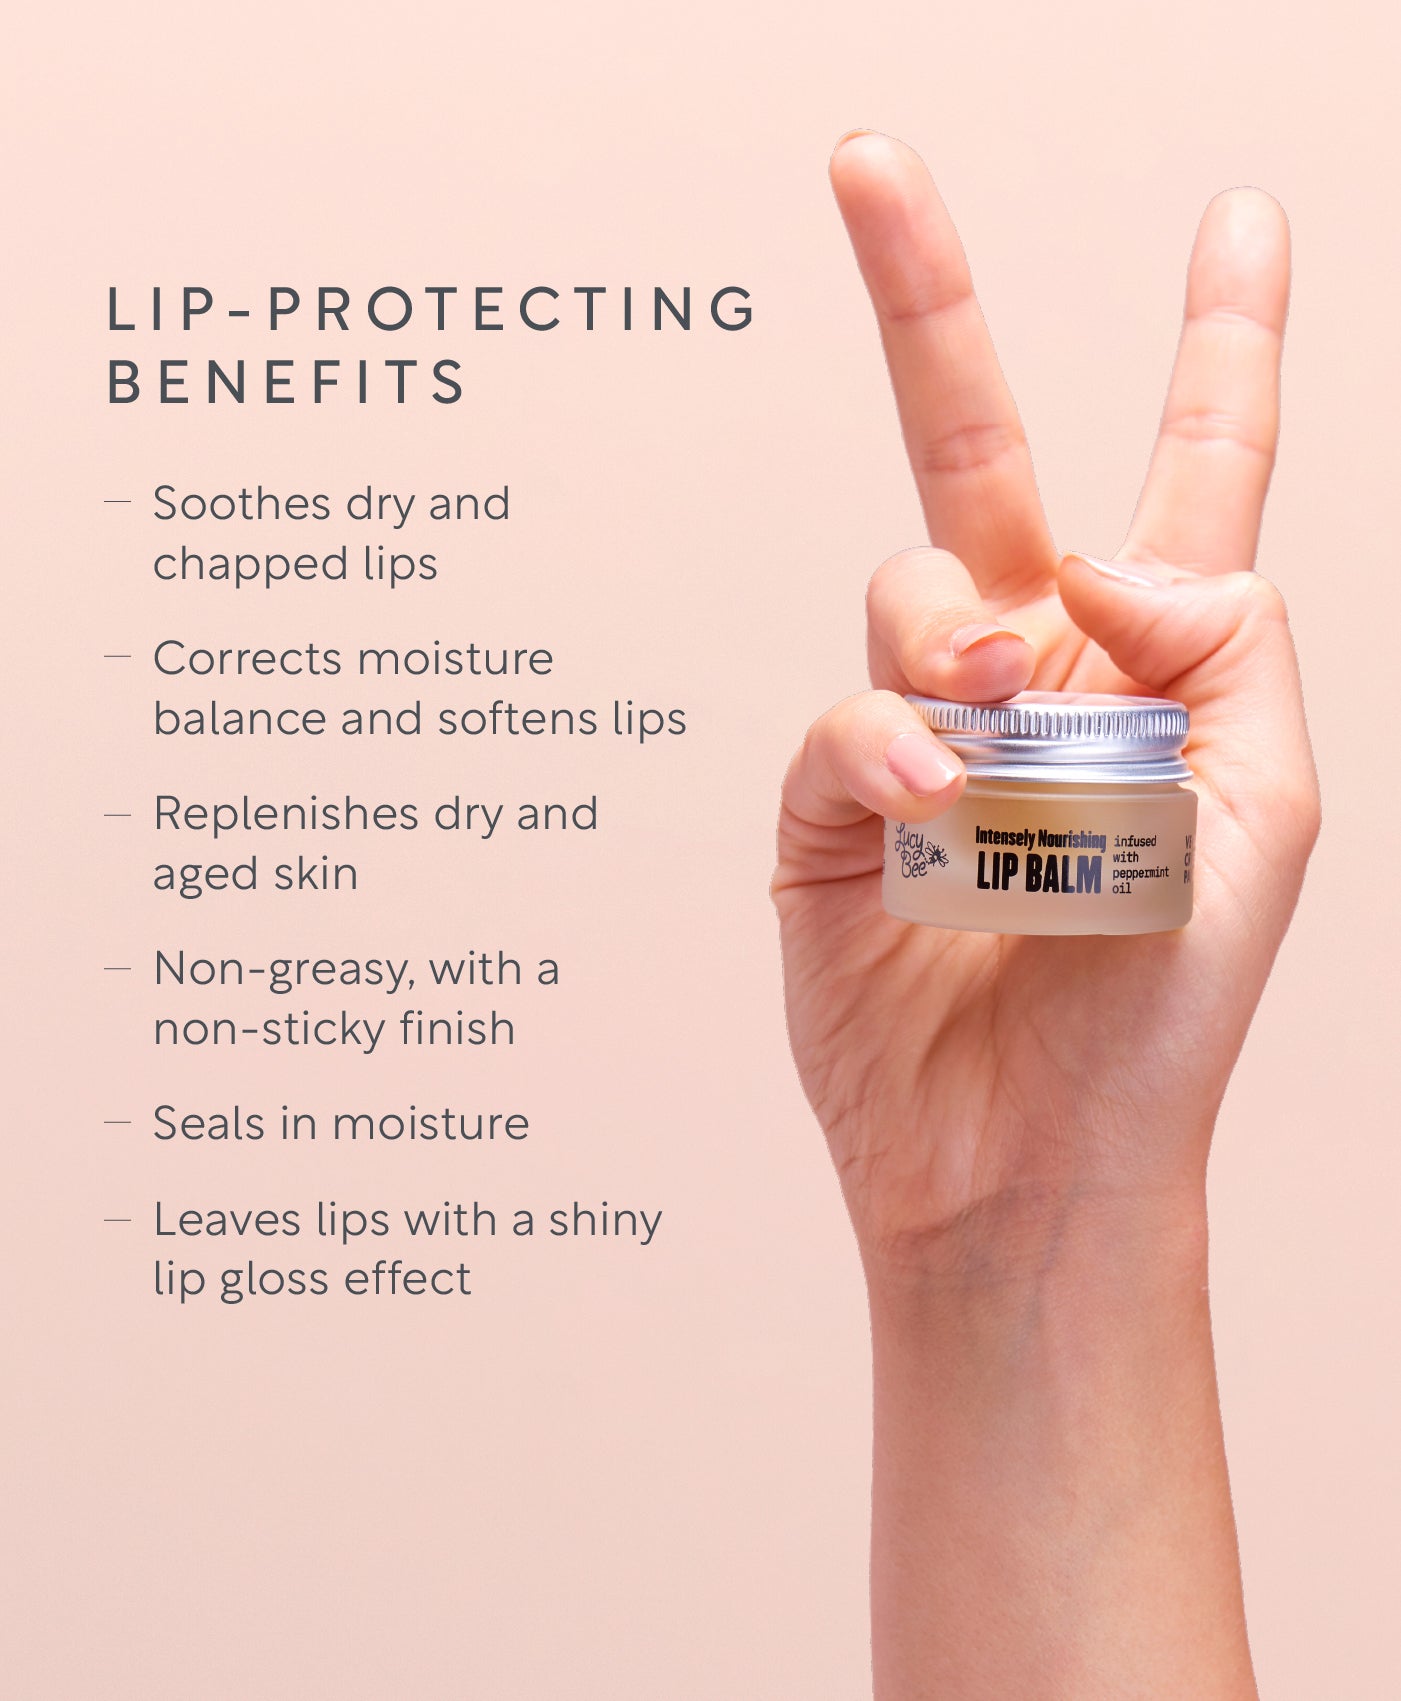 Lip balm for dry lips from lucy bee